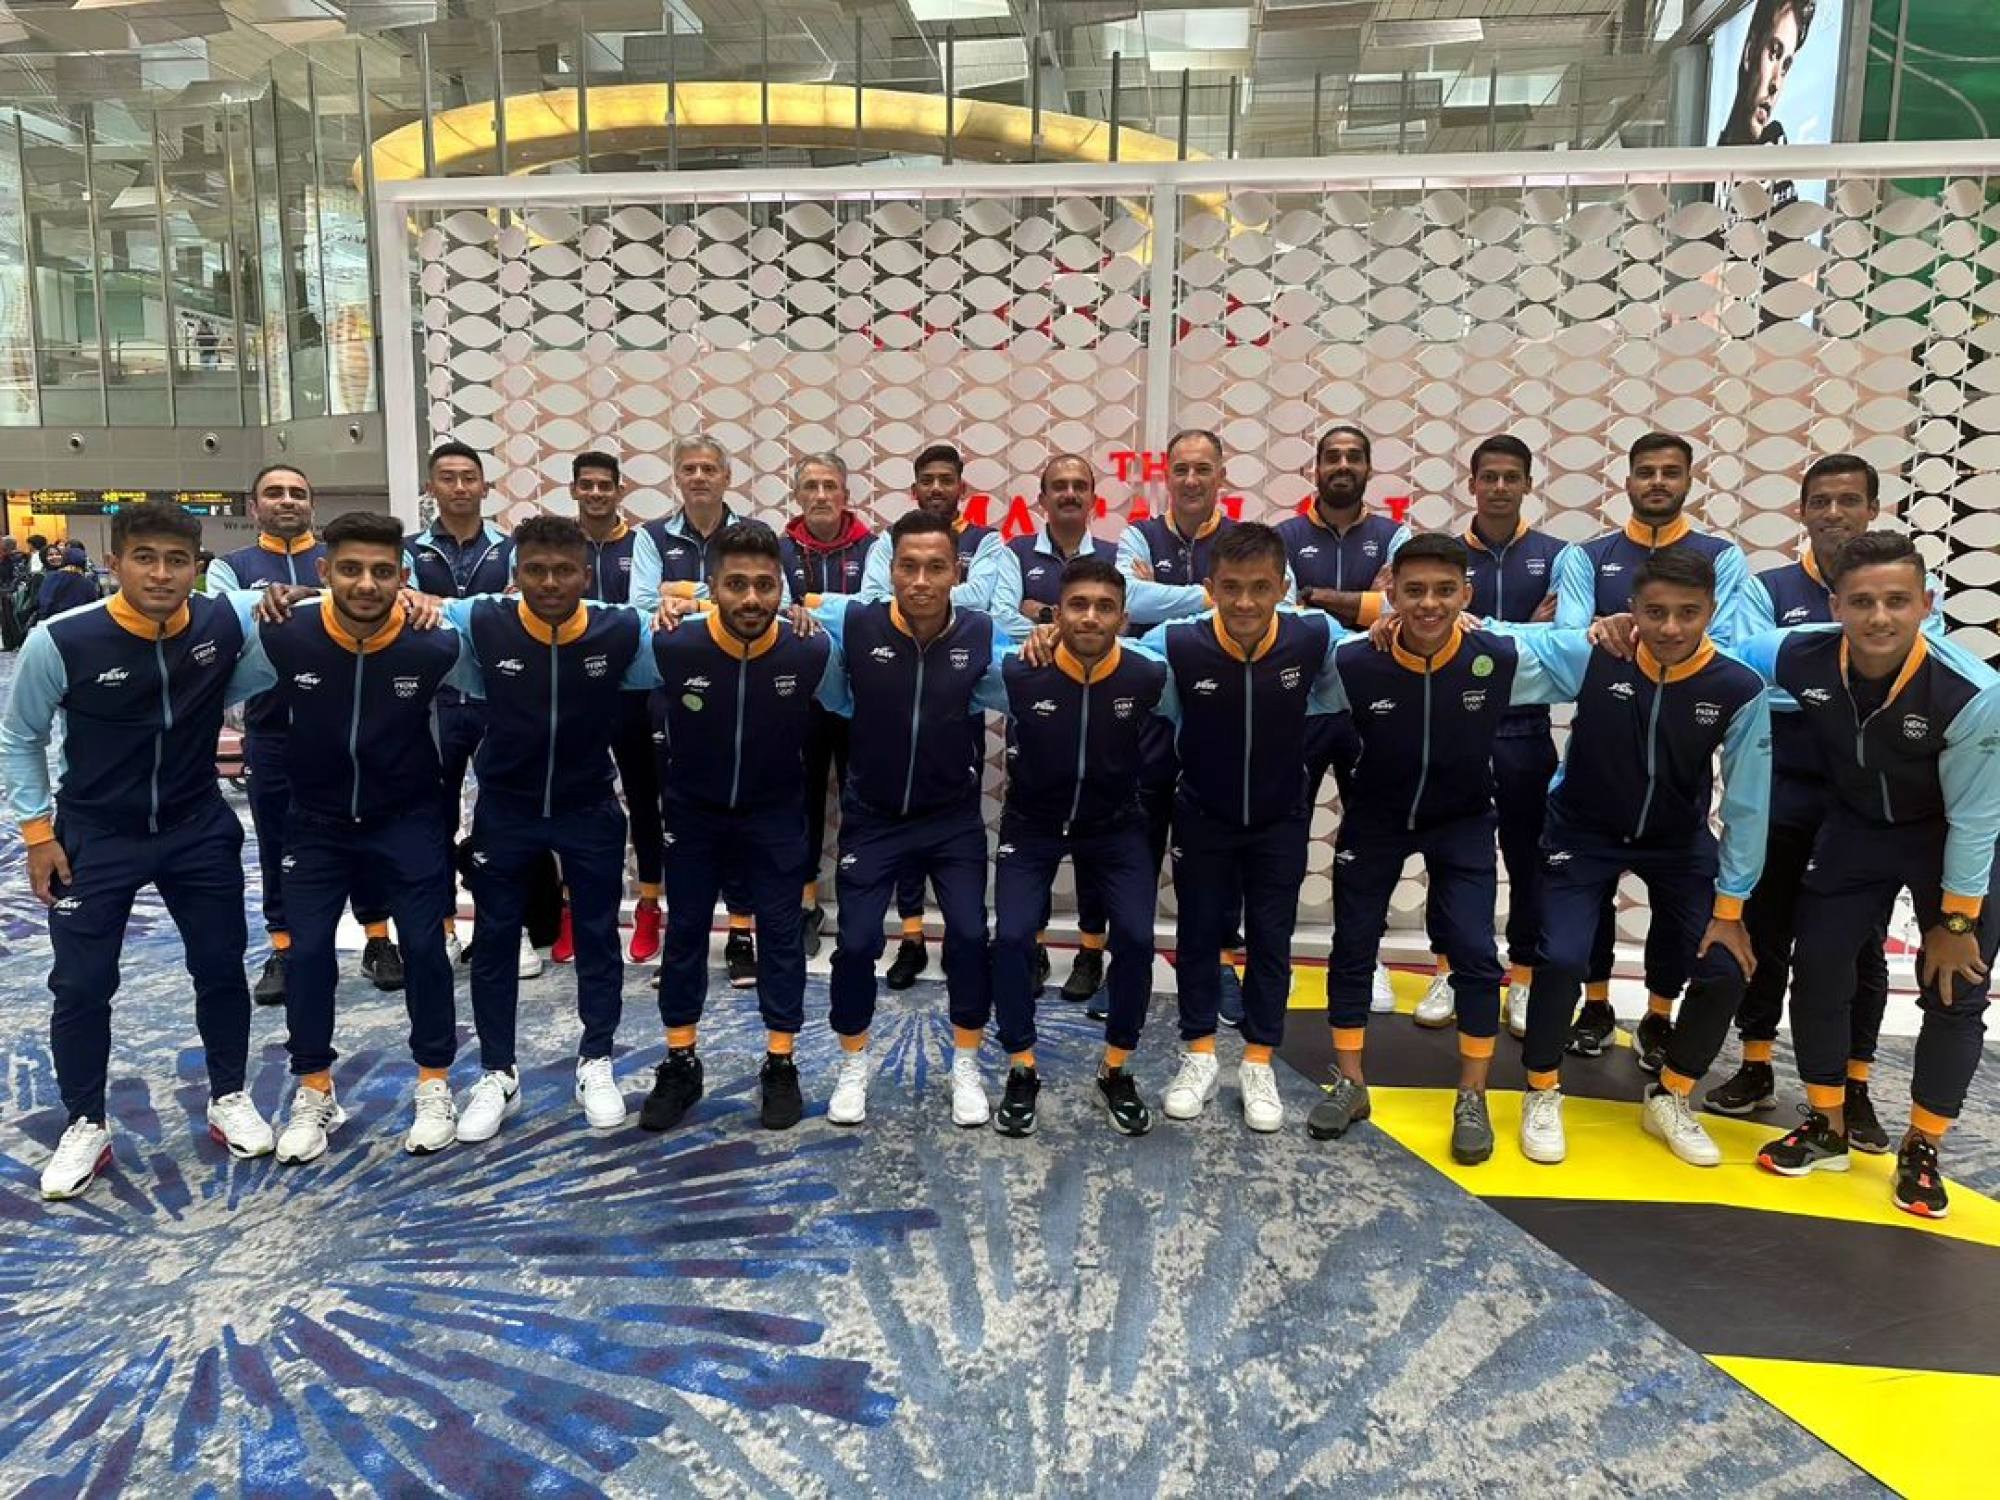 Indian football team to play at Asian Games 2023